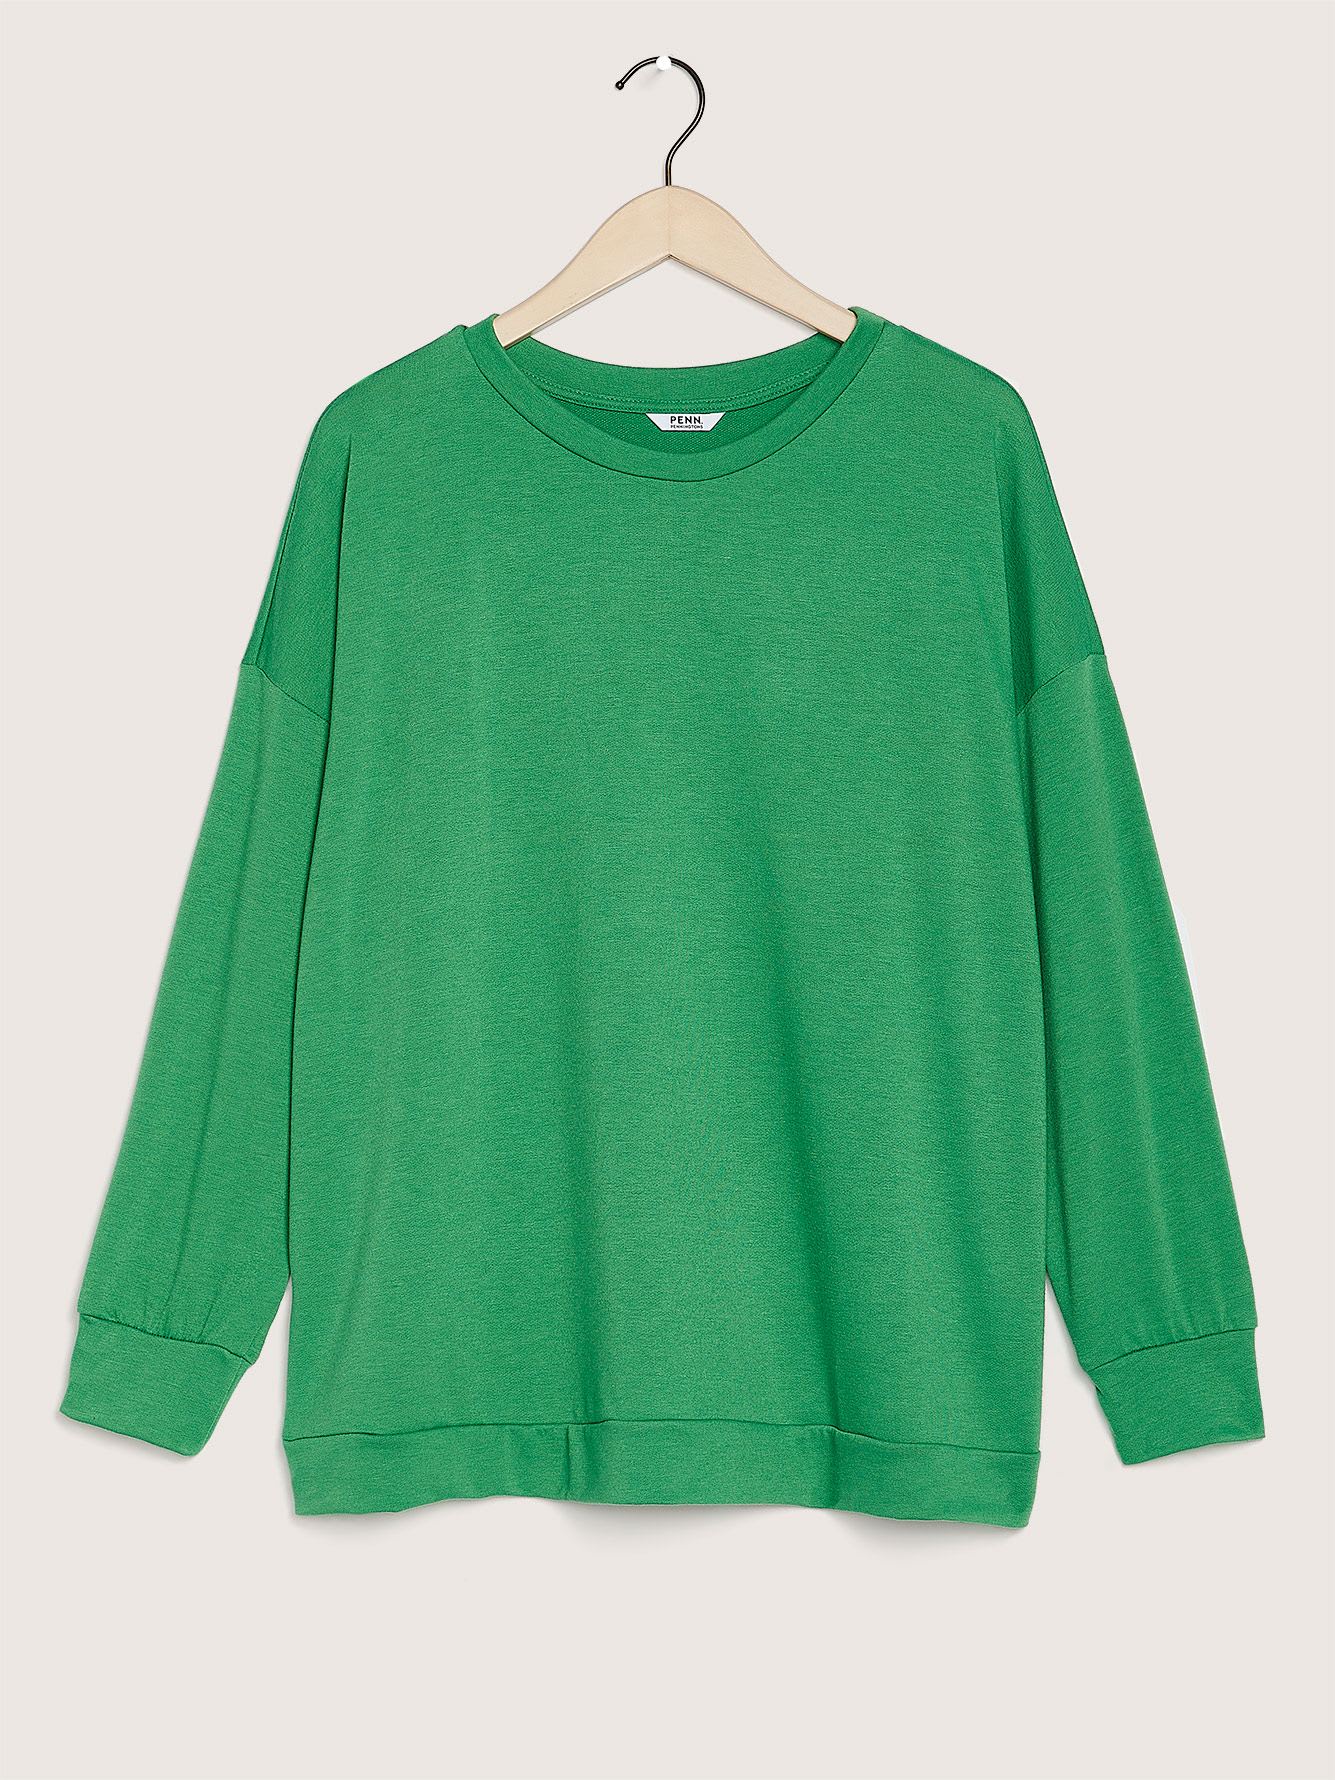 Long Sleeve Crew Neck Knit Top